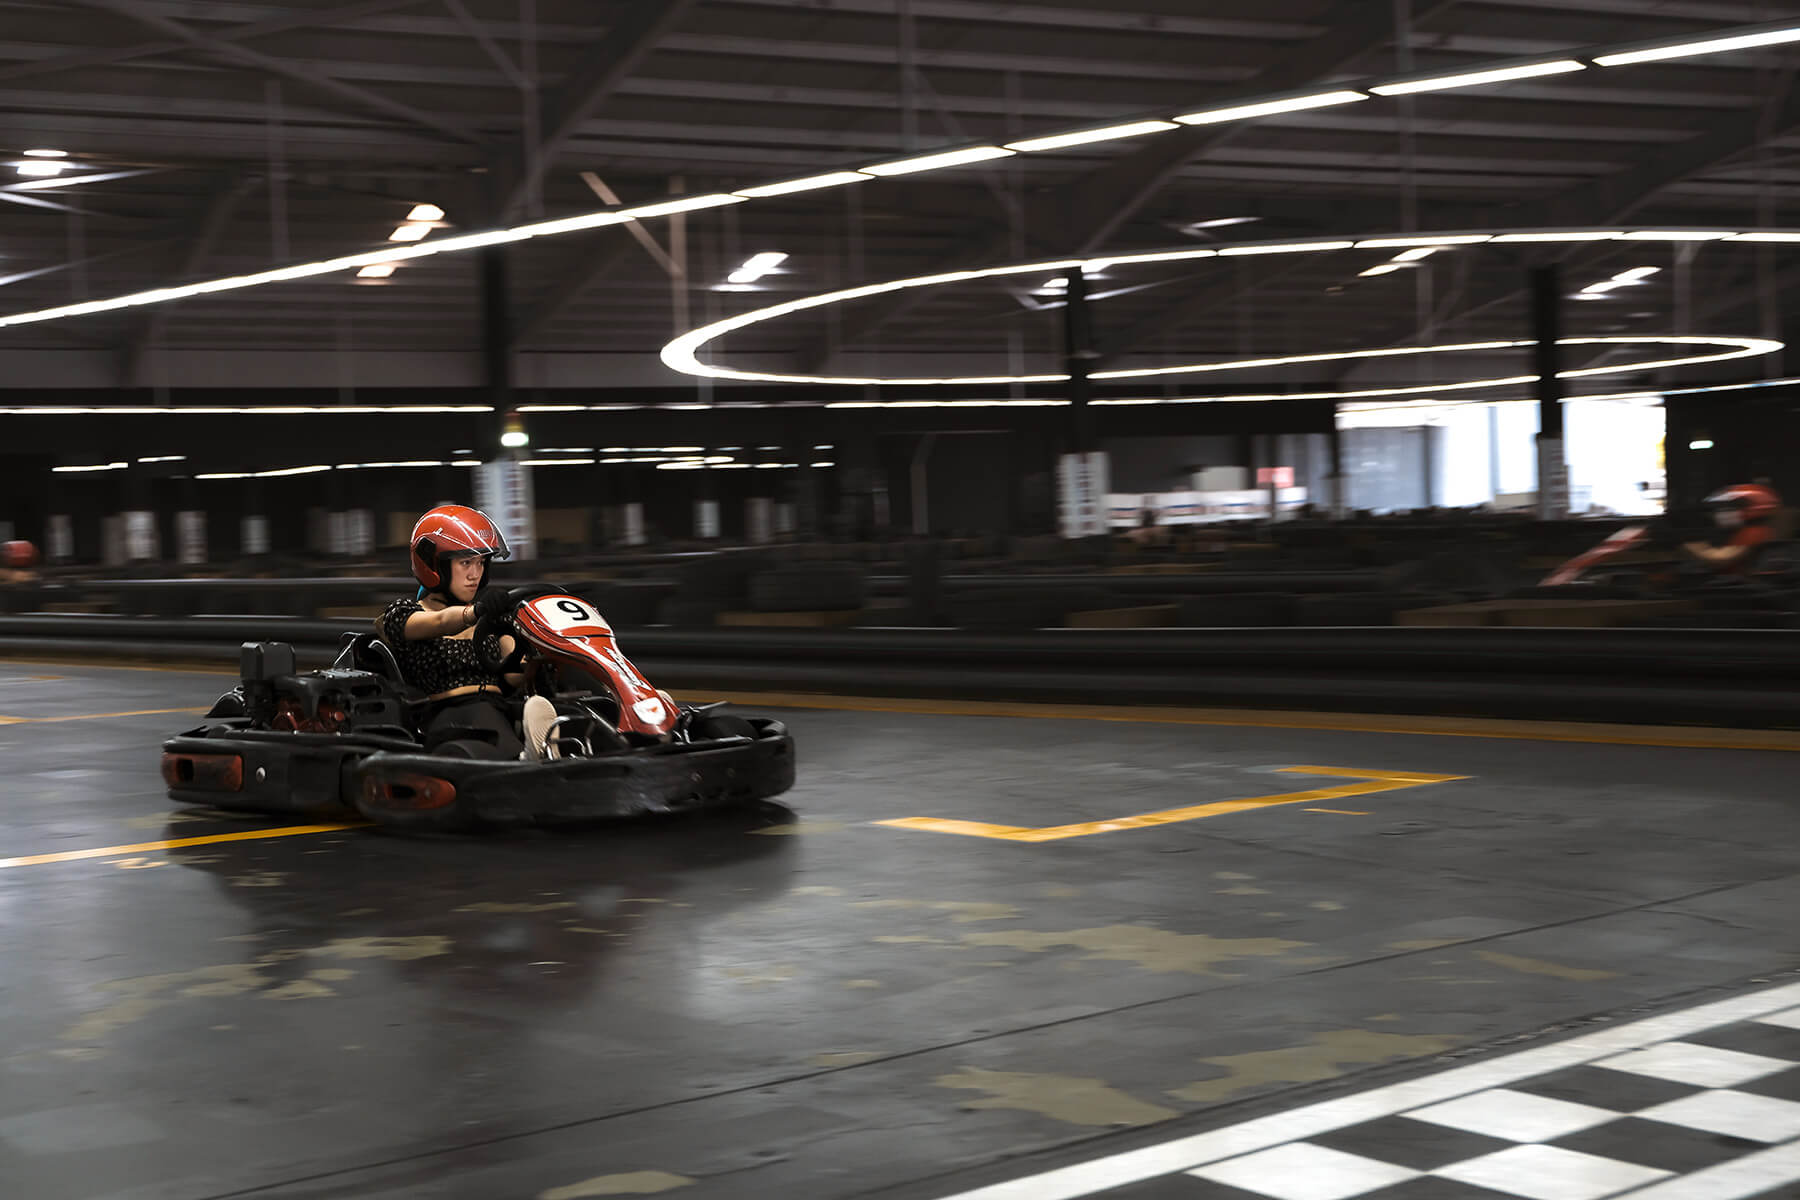 Put your game face on and race with your friends through the sharp twist and turns of the race track.